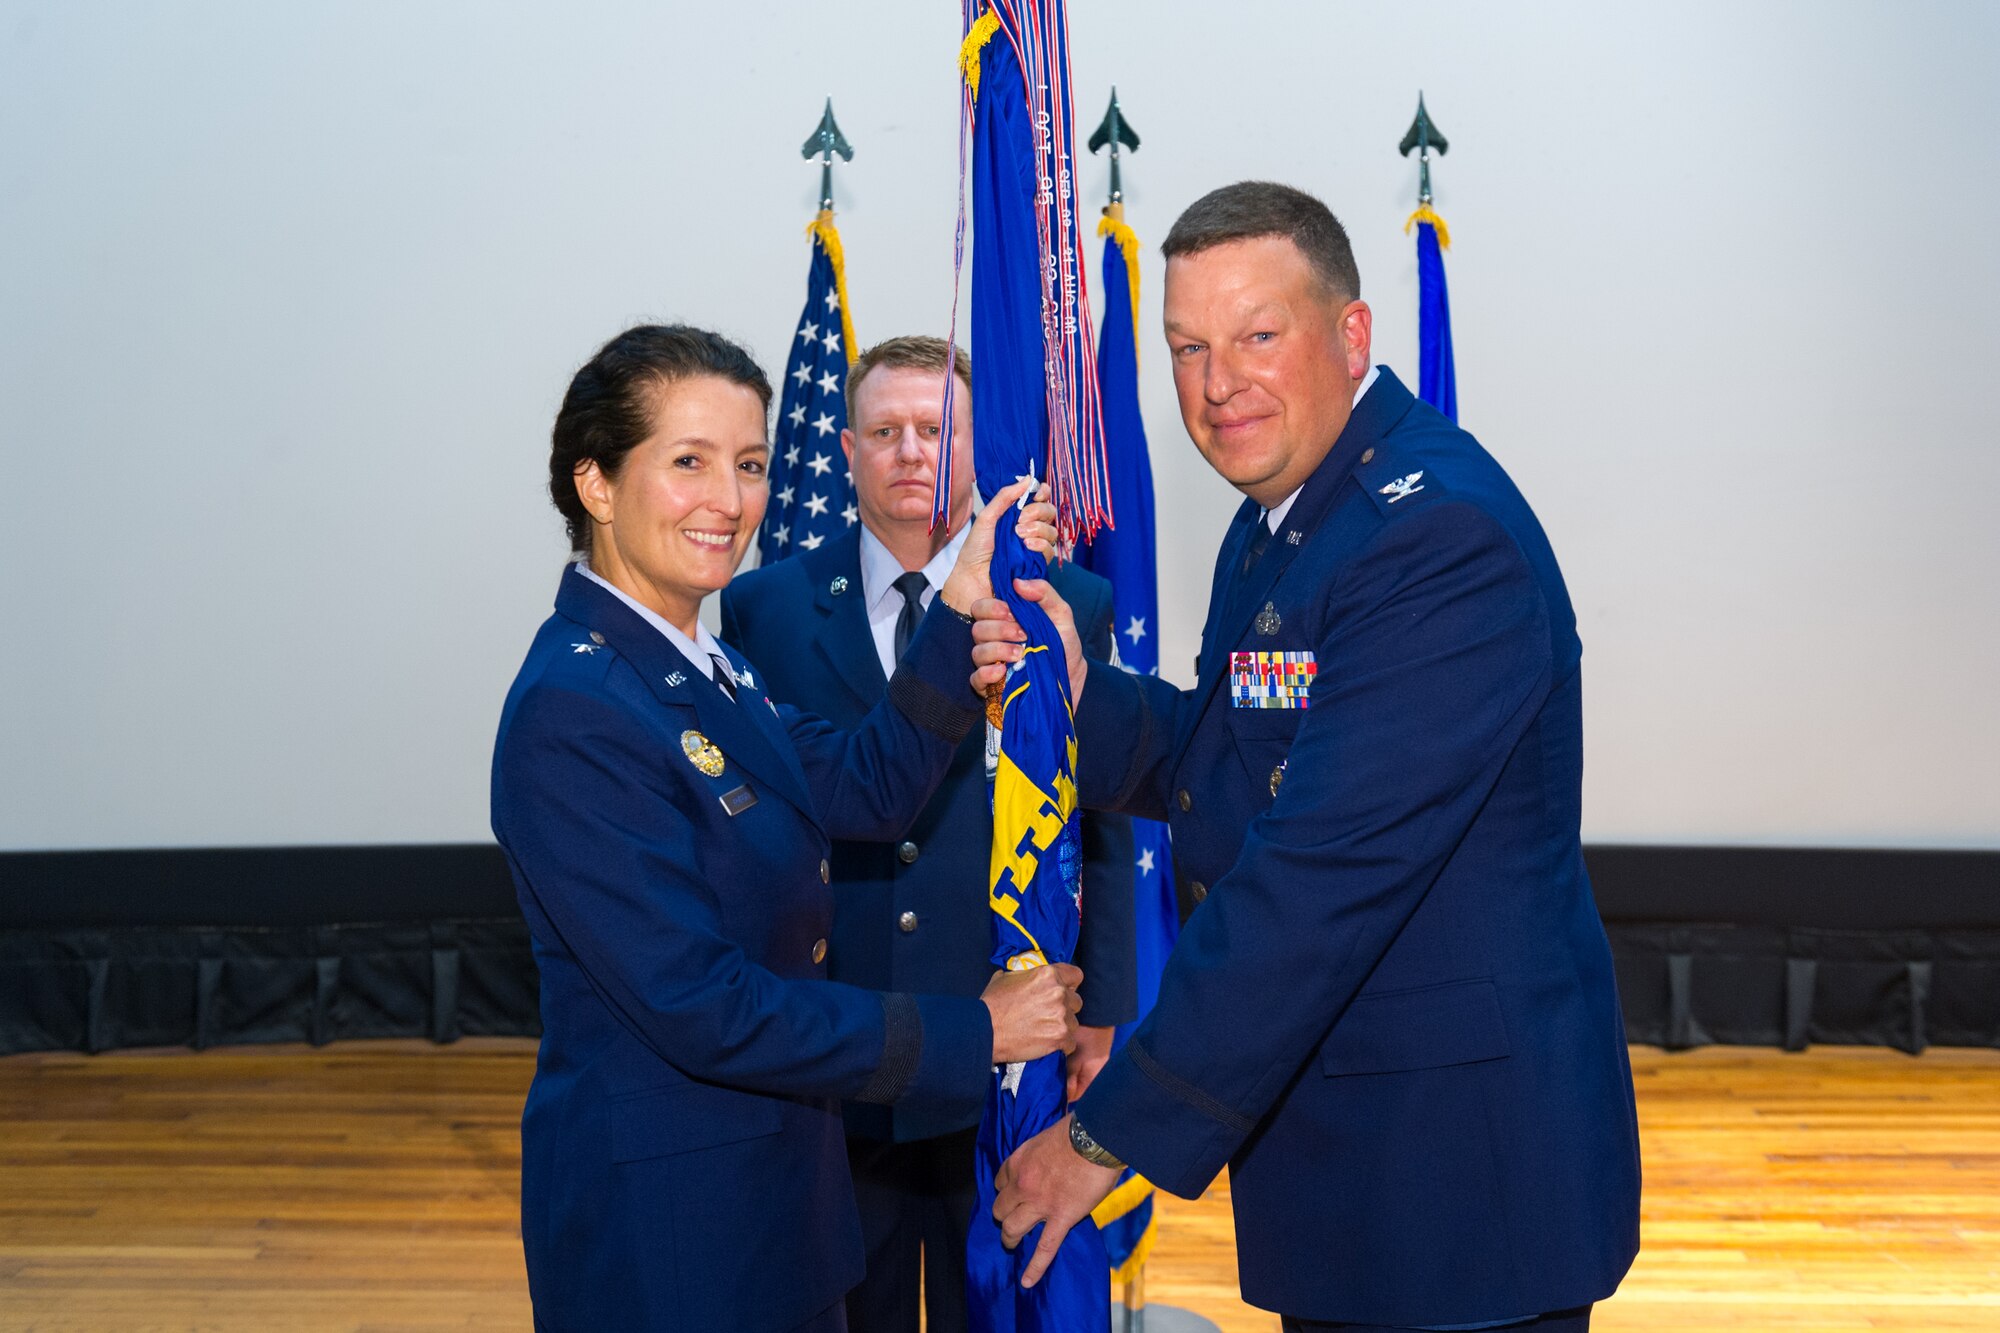 Brig. Gen. Nina Armagno, 45th Space Wing commander, left, presents Col. Matthew Wallace, 45th Mission Support Group commander, with the 45th MSG guidon during a change of command ceremony, Dec.  1, 2014, at Patrick Air Force Base, Fla. Changes of command are a military tradition representing the transfer of responsibilities from the presiding officials to the upcoming official. (U.S. Air Force photo/Cory Long)
